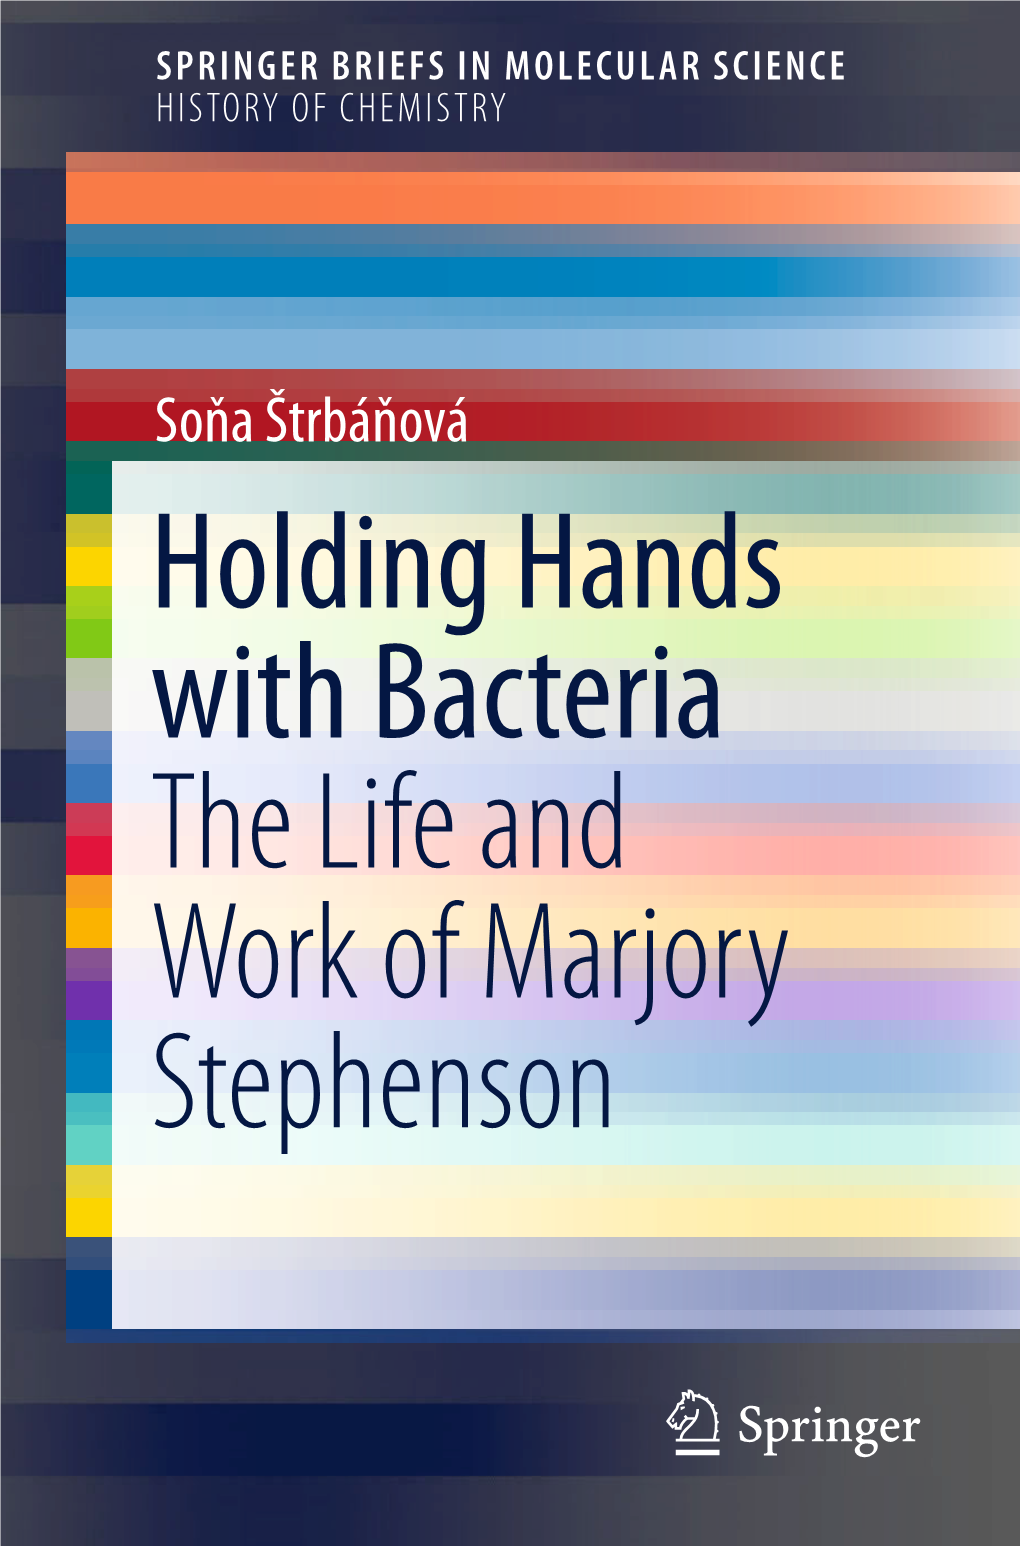 Holding Hands with Bacteria the Life and Work of Marjory Stephenson